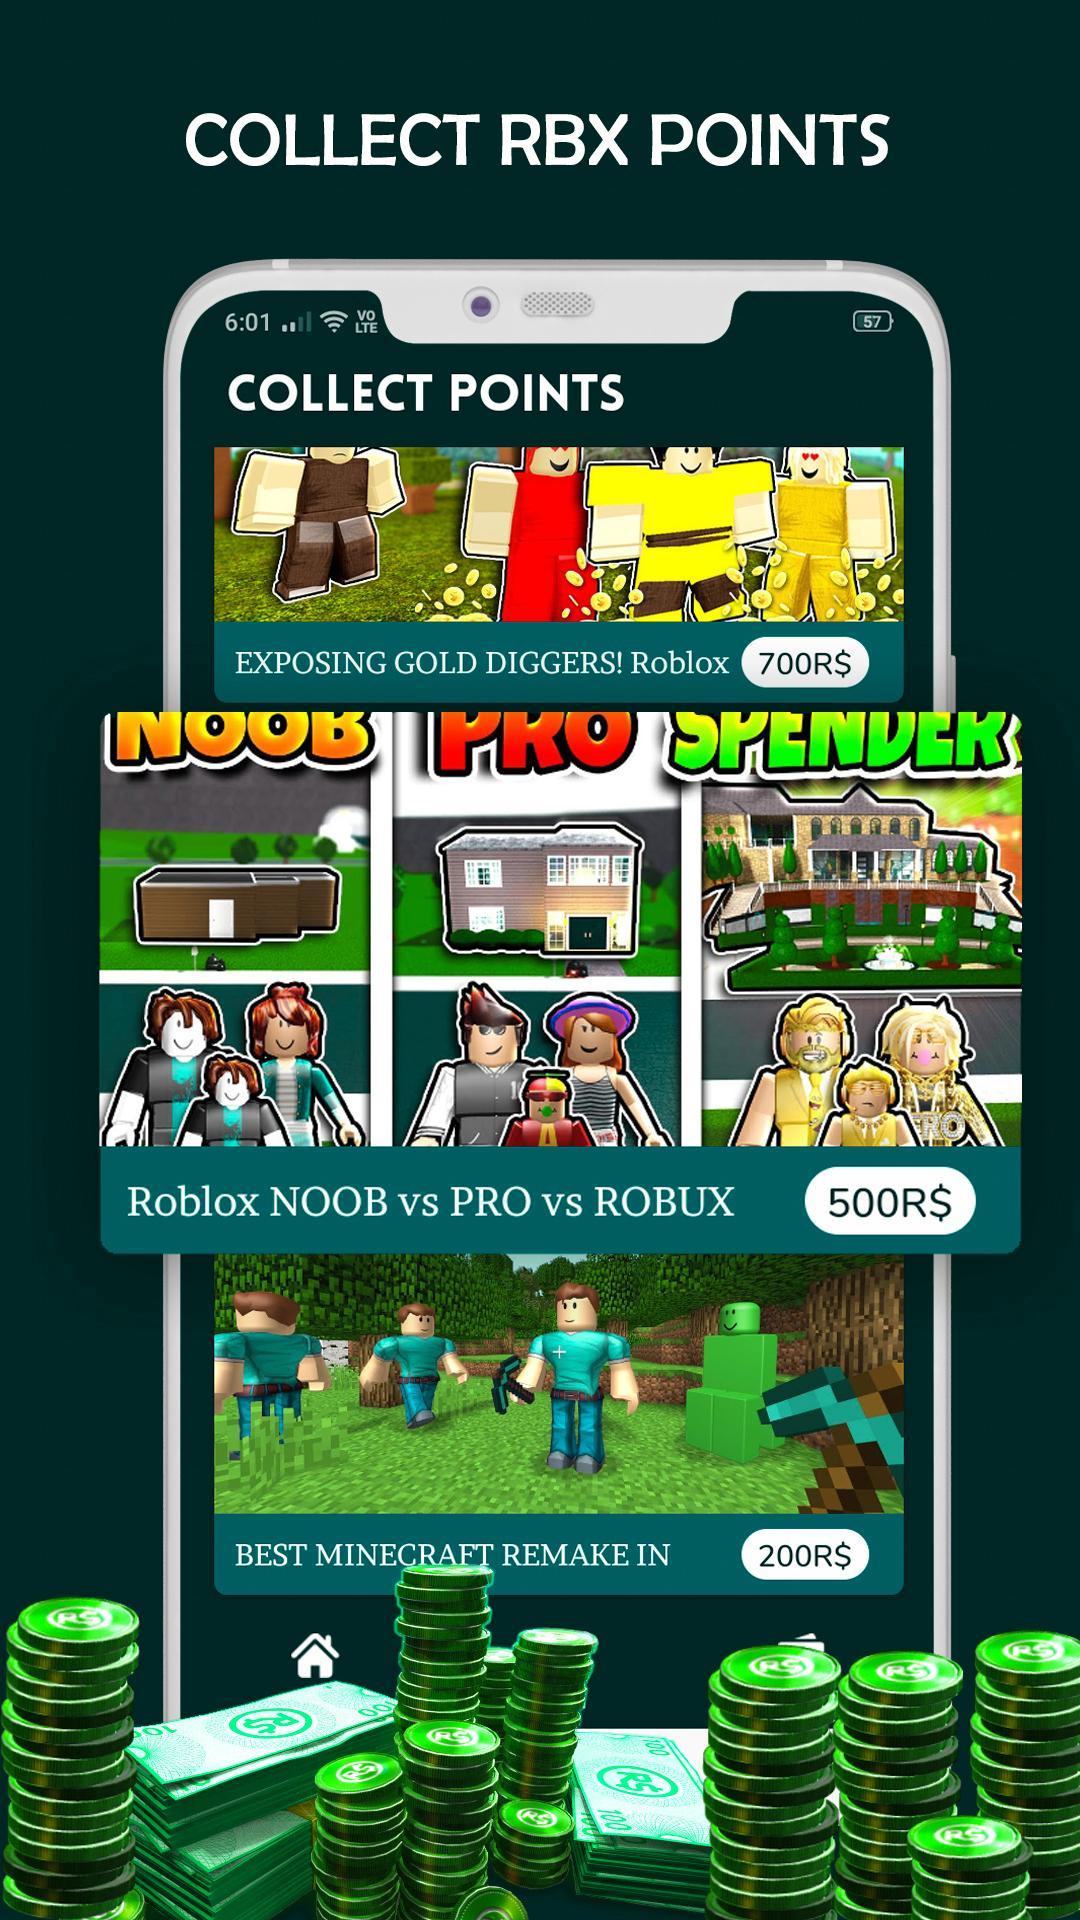 Free Robux Pro 2019 Win Daily Free Rbx For Android Apk Download - rbx points free robux